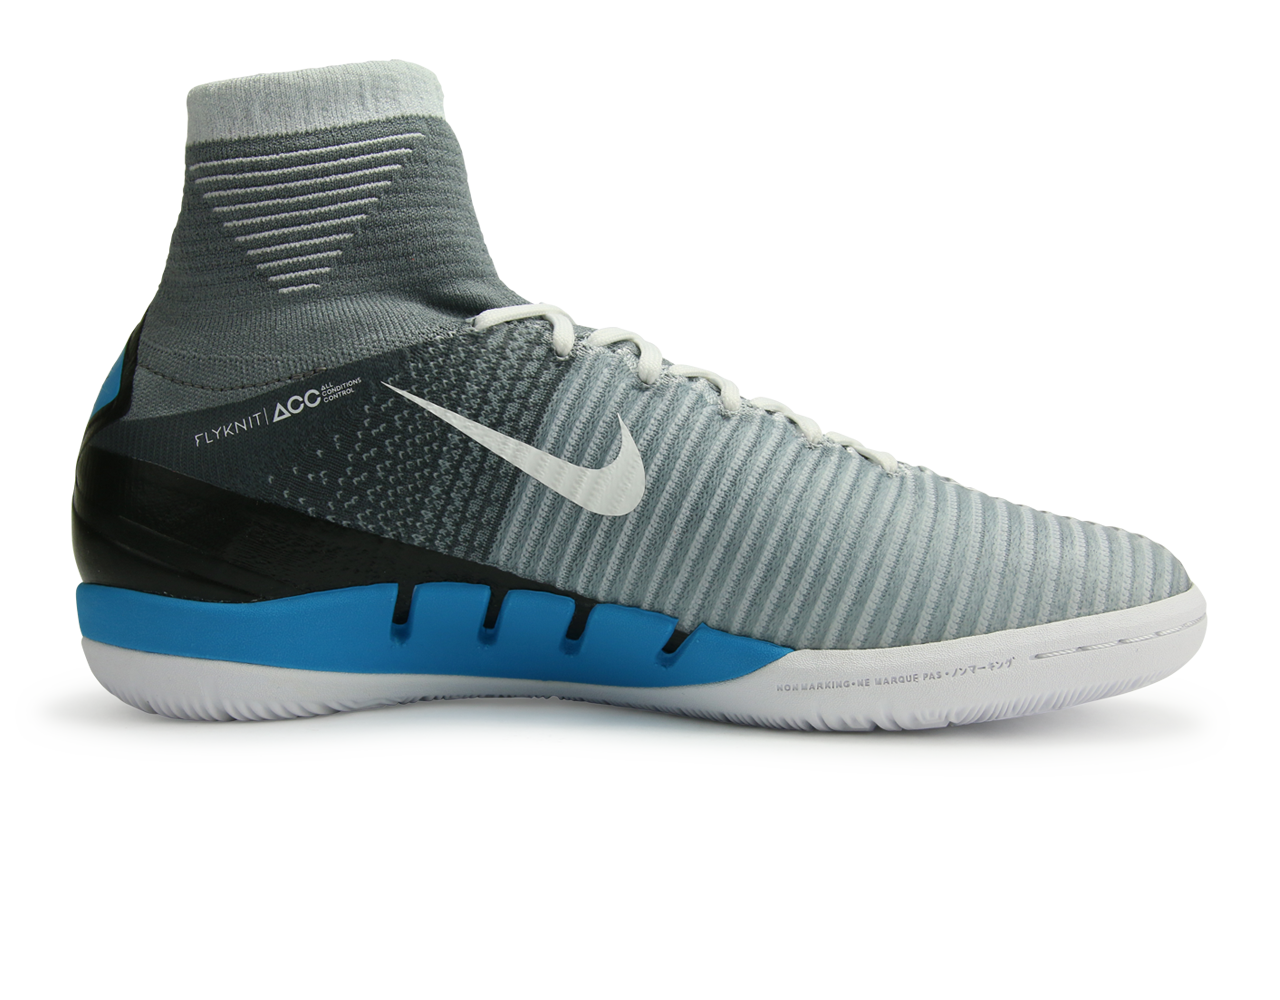 Nike Men's MercurialX Proximo II Dynamic Fit Indoor Soccer Shoes Wolf Grey/White/Pure Platinum